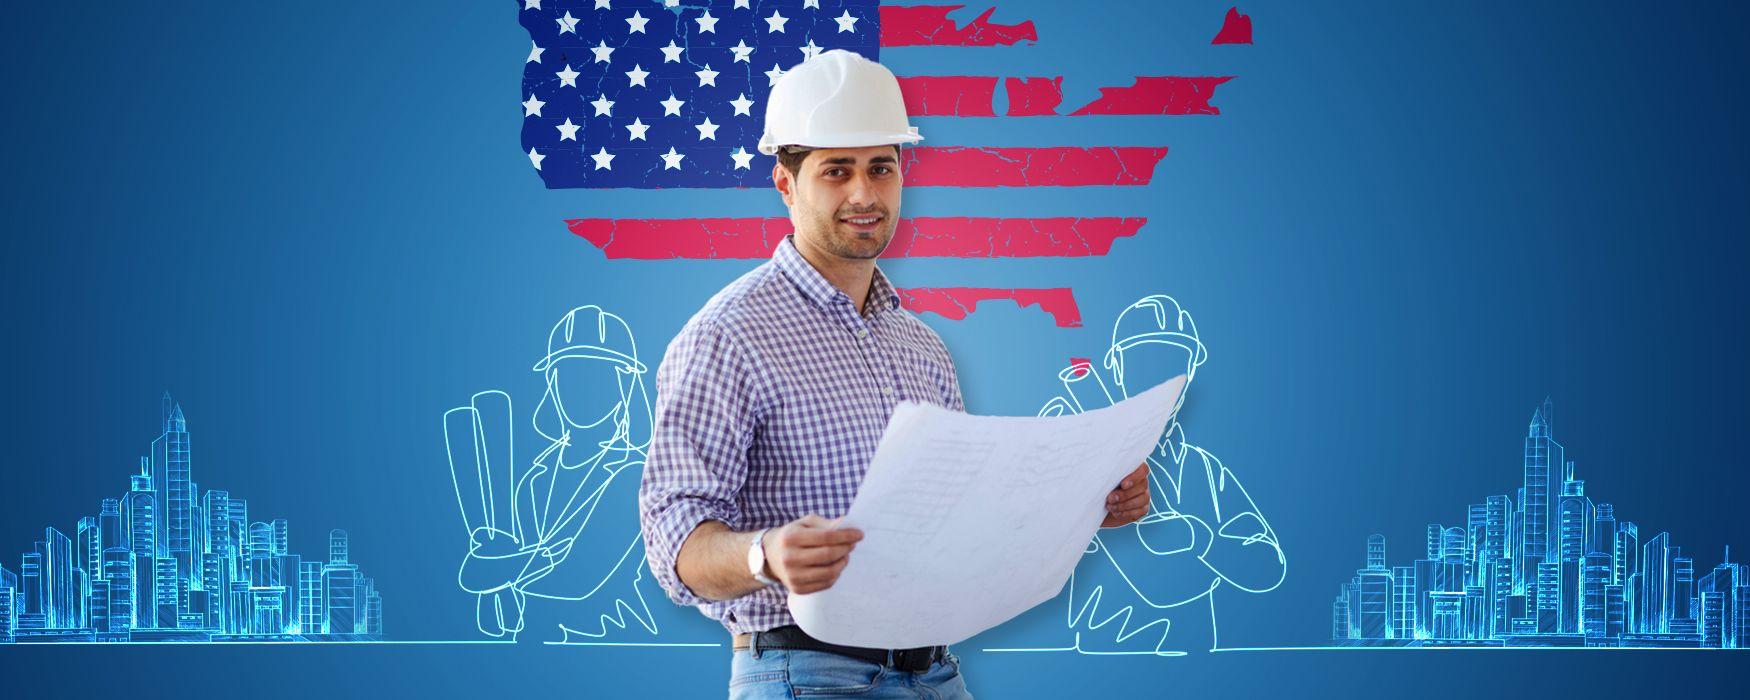 MS-in-Civil-Engineering-in-the-USA.jpg